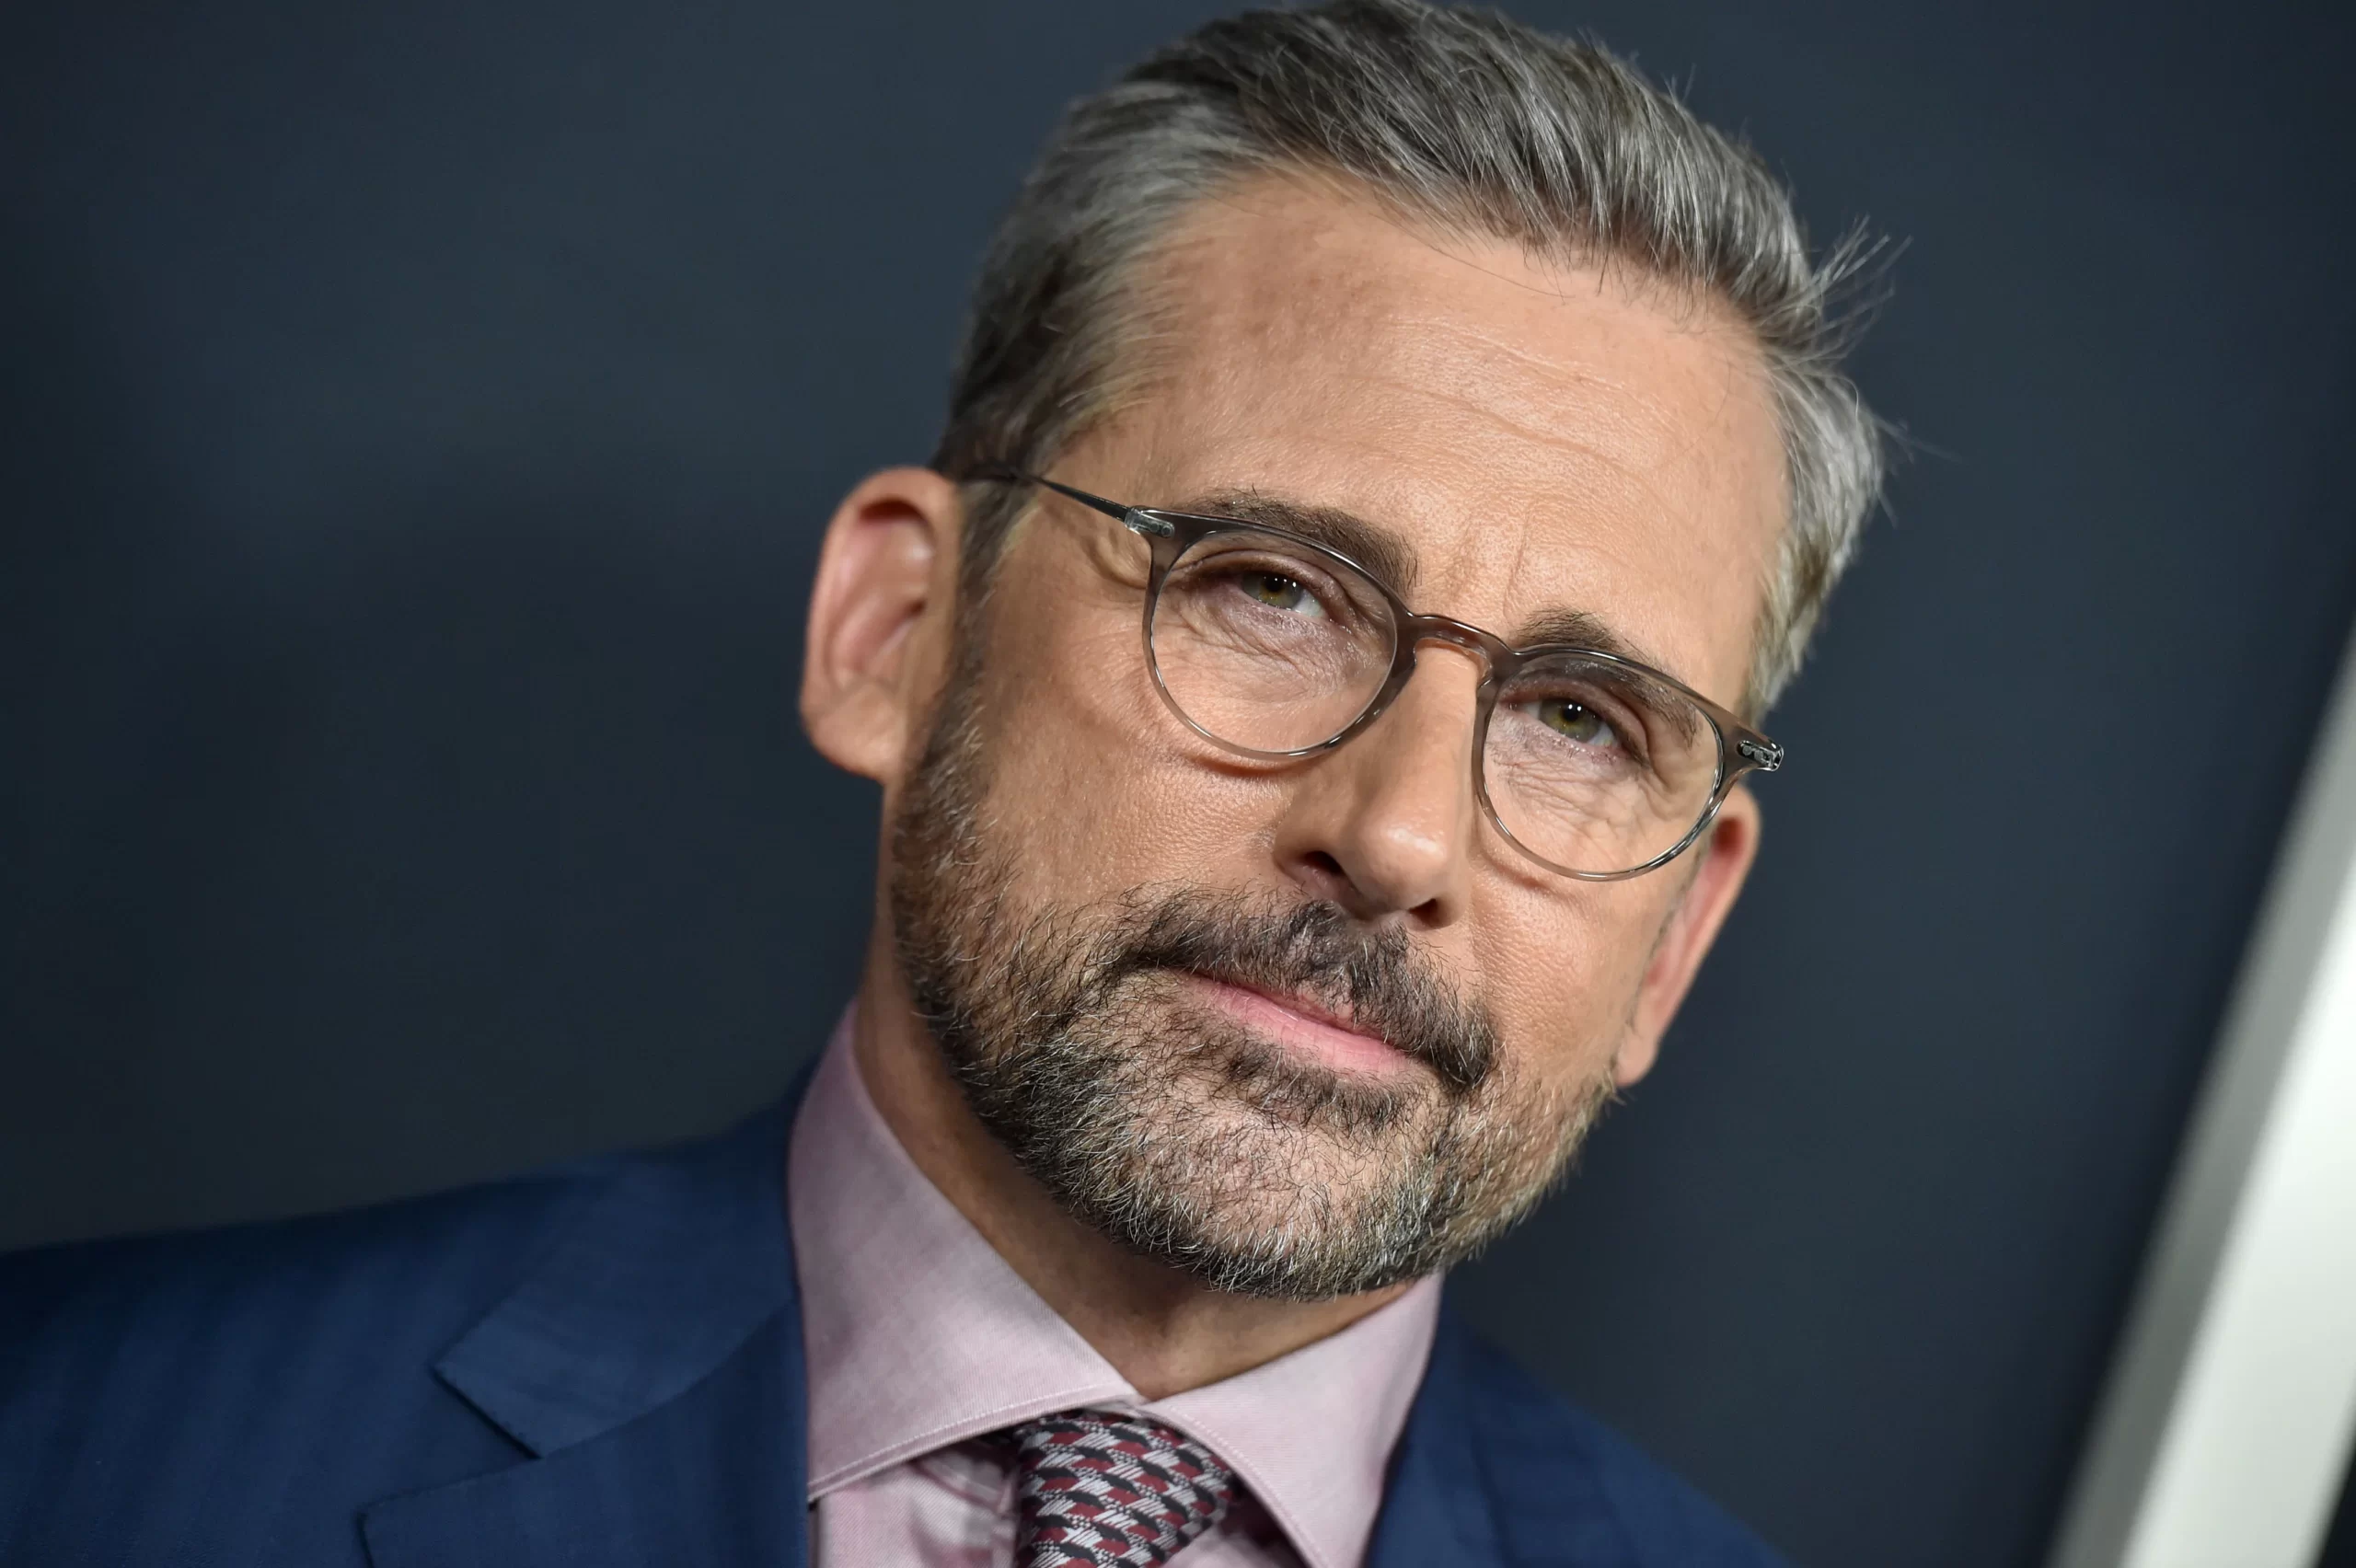 What is Steve Carrell known for?